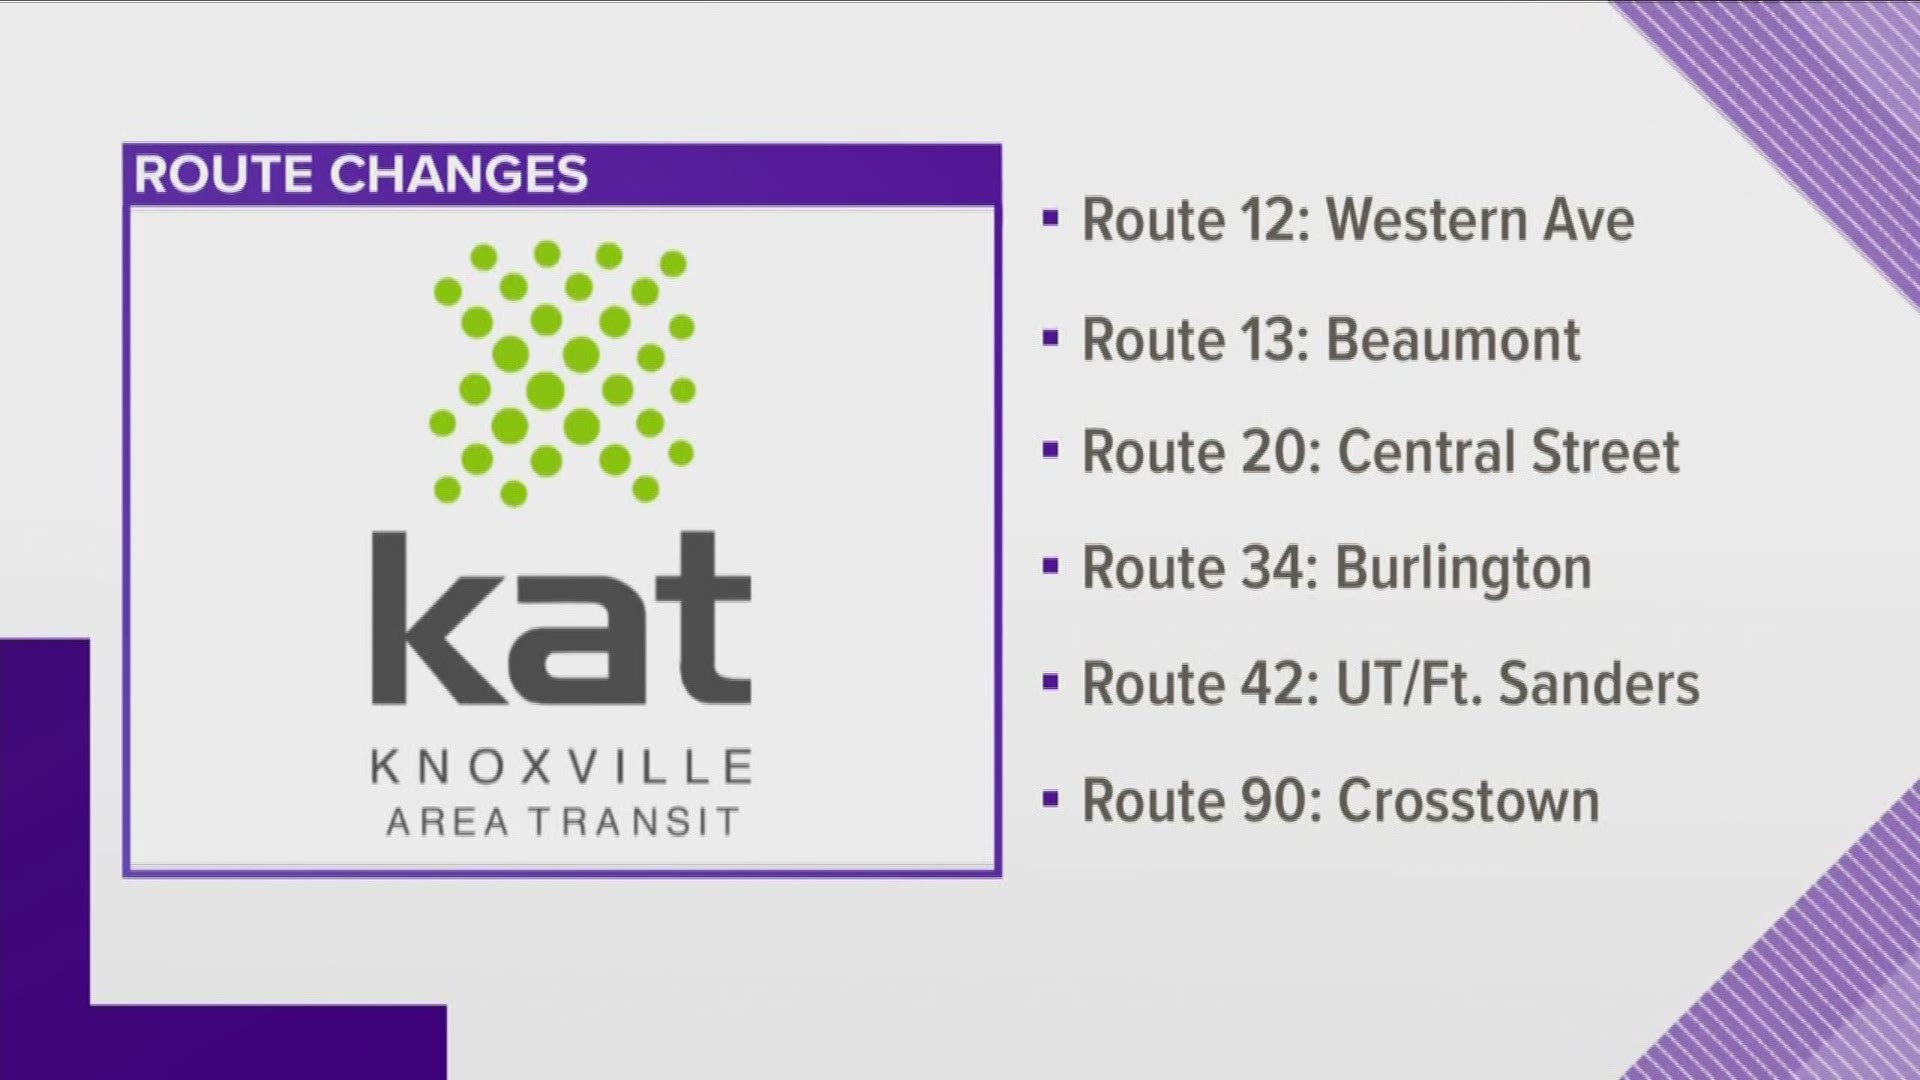 Routes 12, 13, 20, 34, 42 and 90 are all seeing major changes starting Monday.